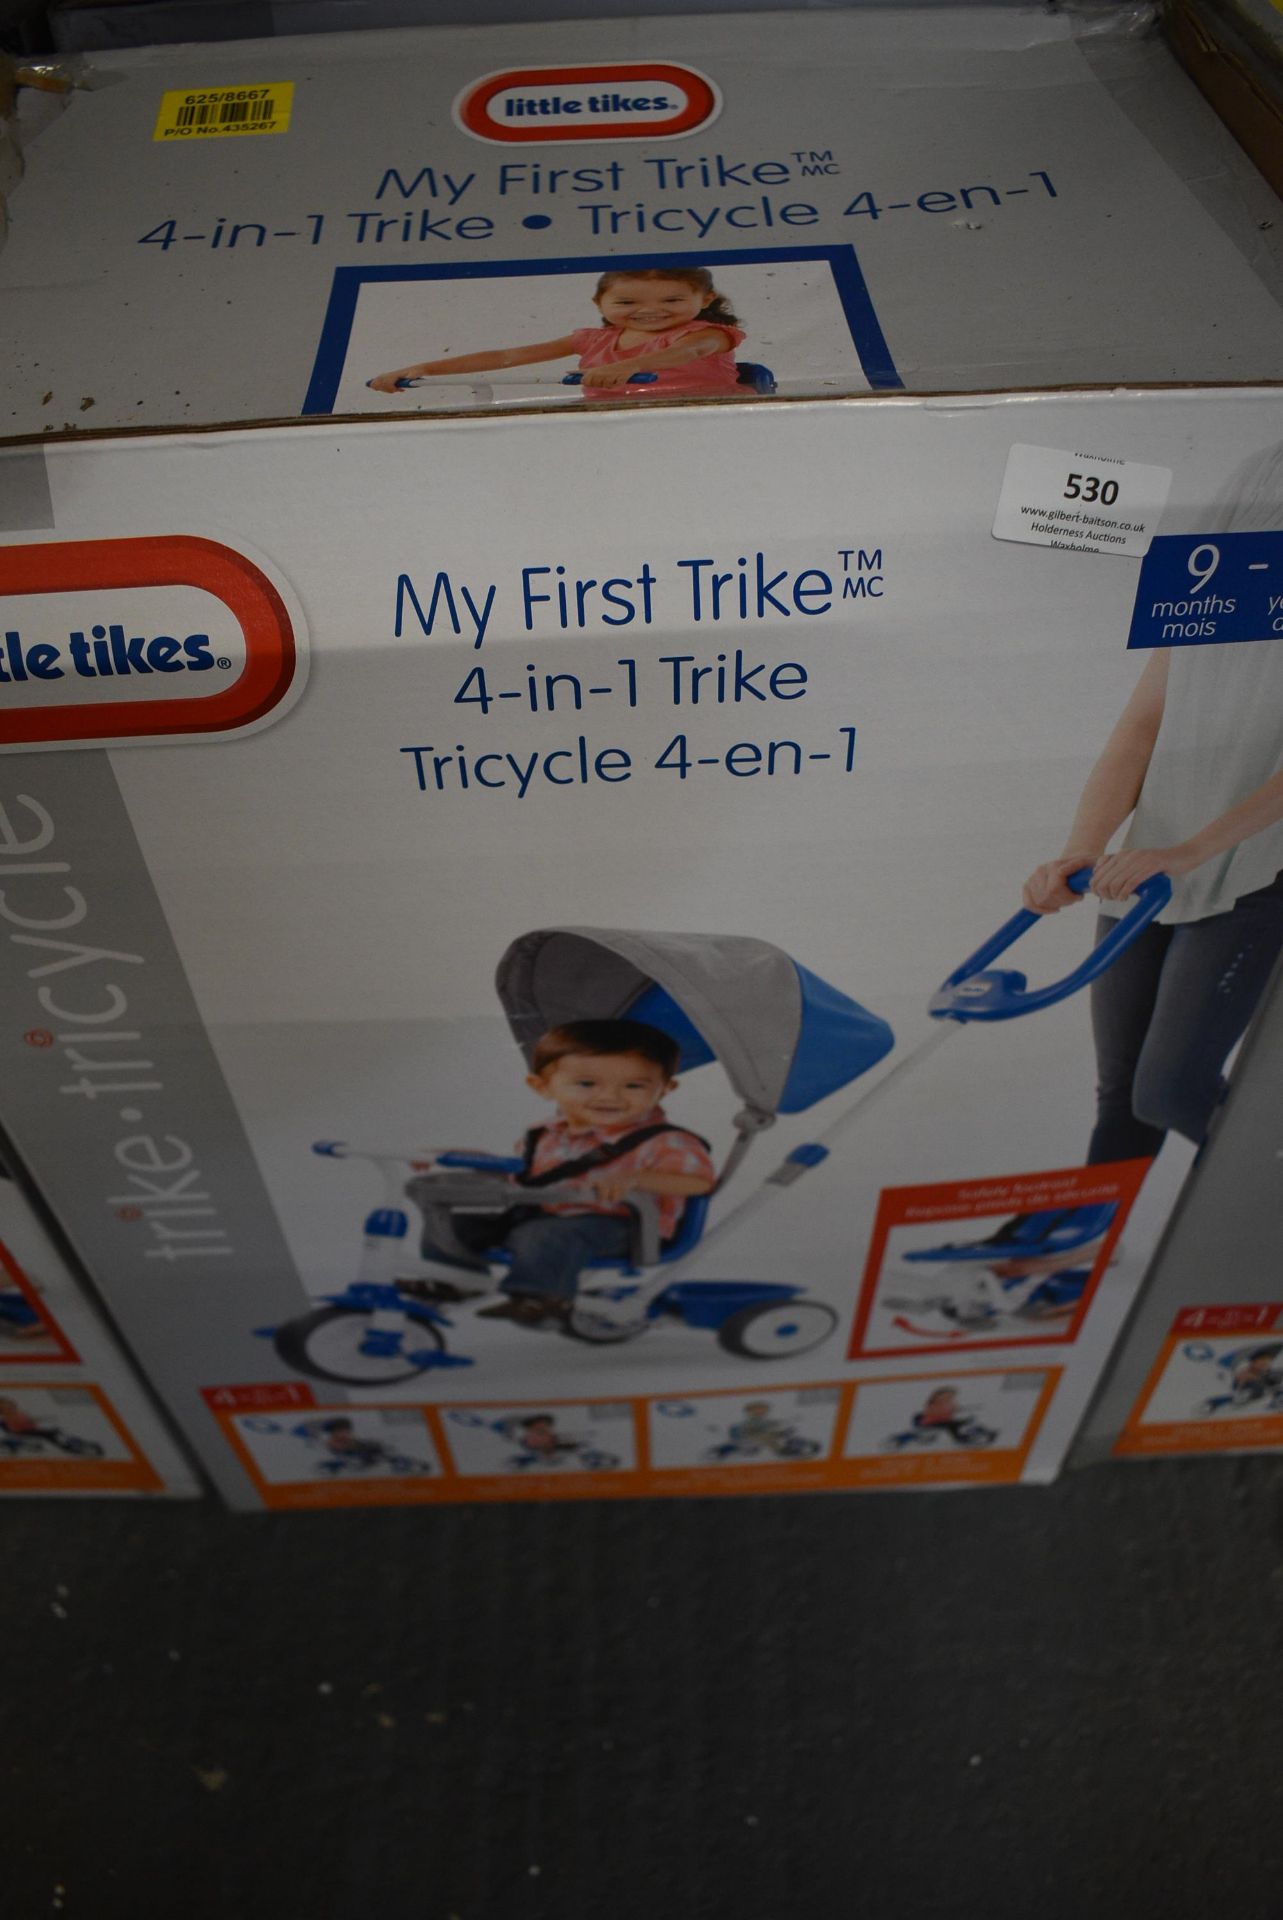 Little Tikes 4-in-1 Tricycle 9m – 5y (blue & grey) - Image 2 of 2